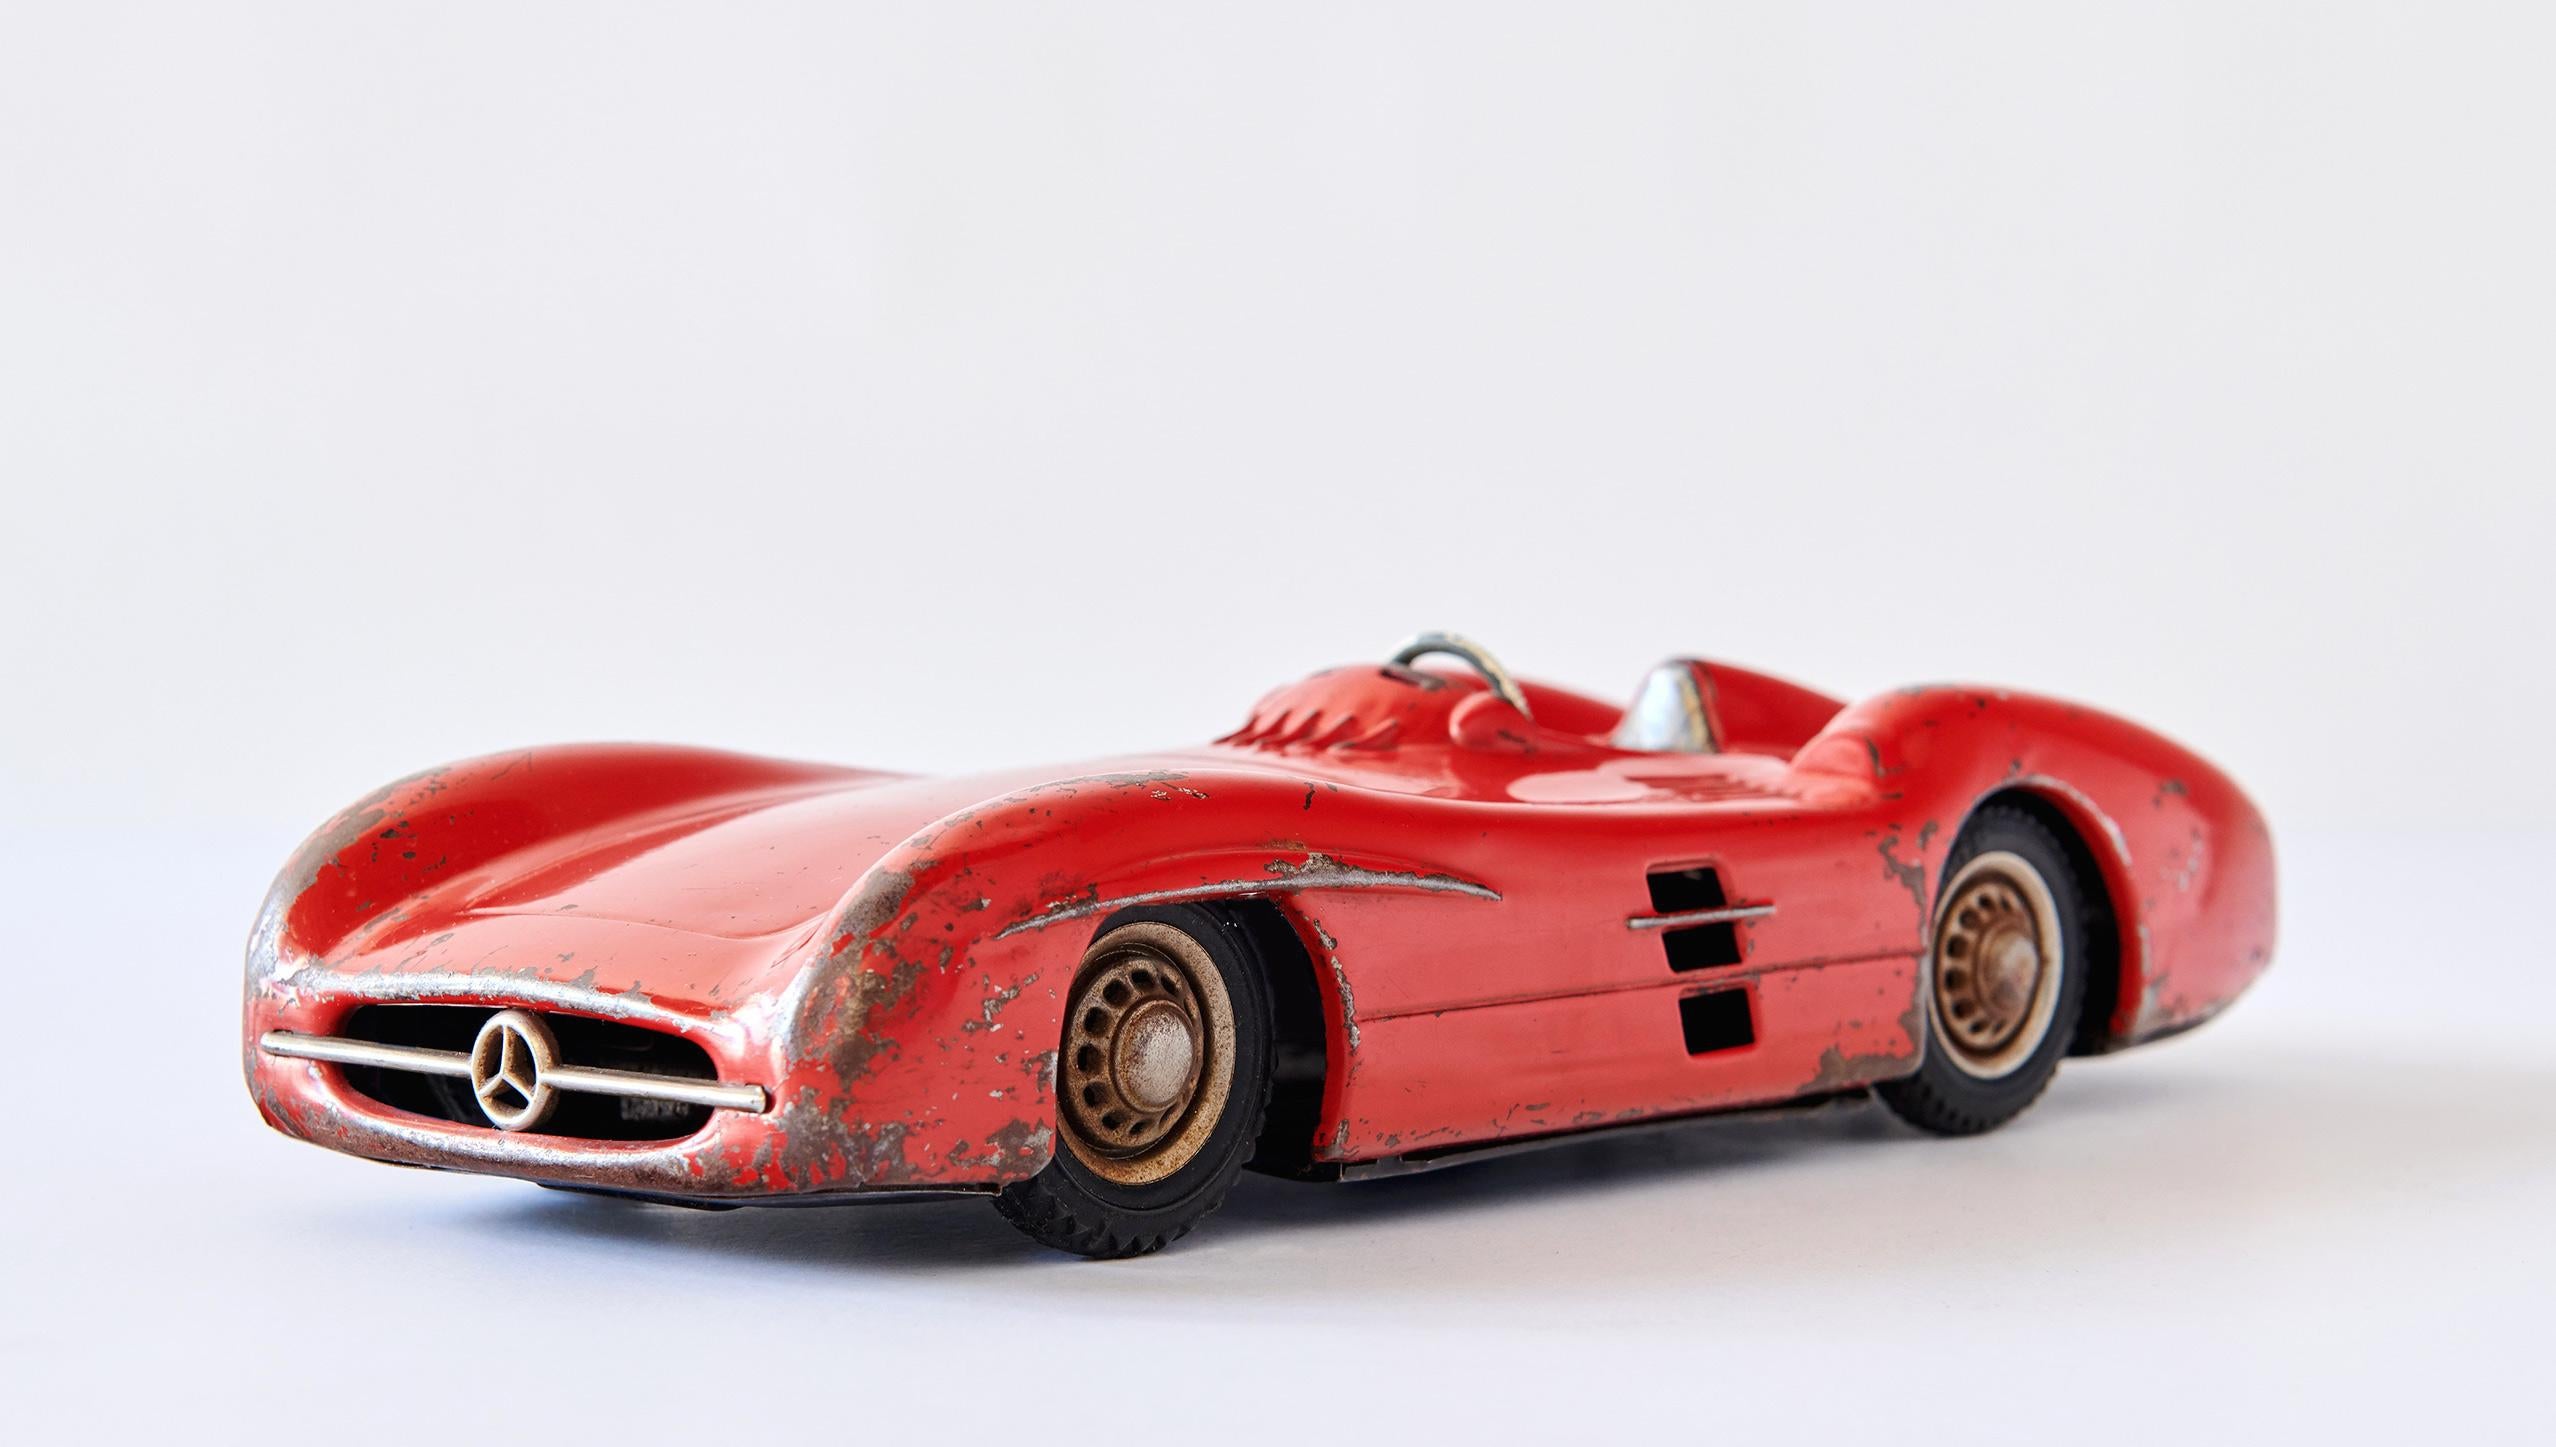 This beautiful 1950s metal toy car is an accurately modeled representation of the technological tour-de-force Mercedes-Benz W196 racing car, a masterpiece of streamlining. It was made by JNF -- Johann Neuhierl Fürth -- in the 1950s. Much played with